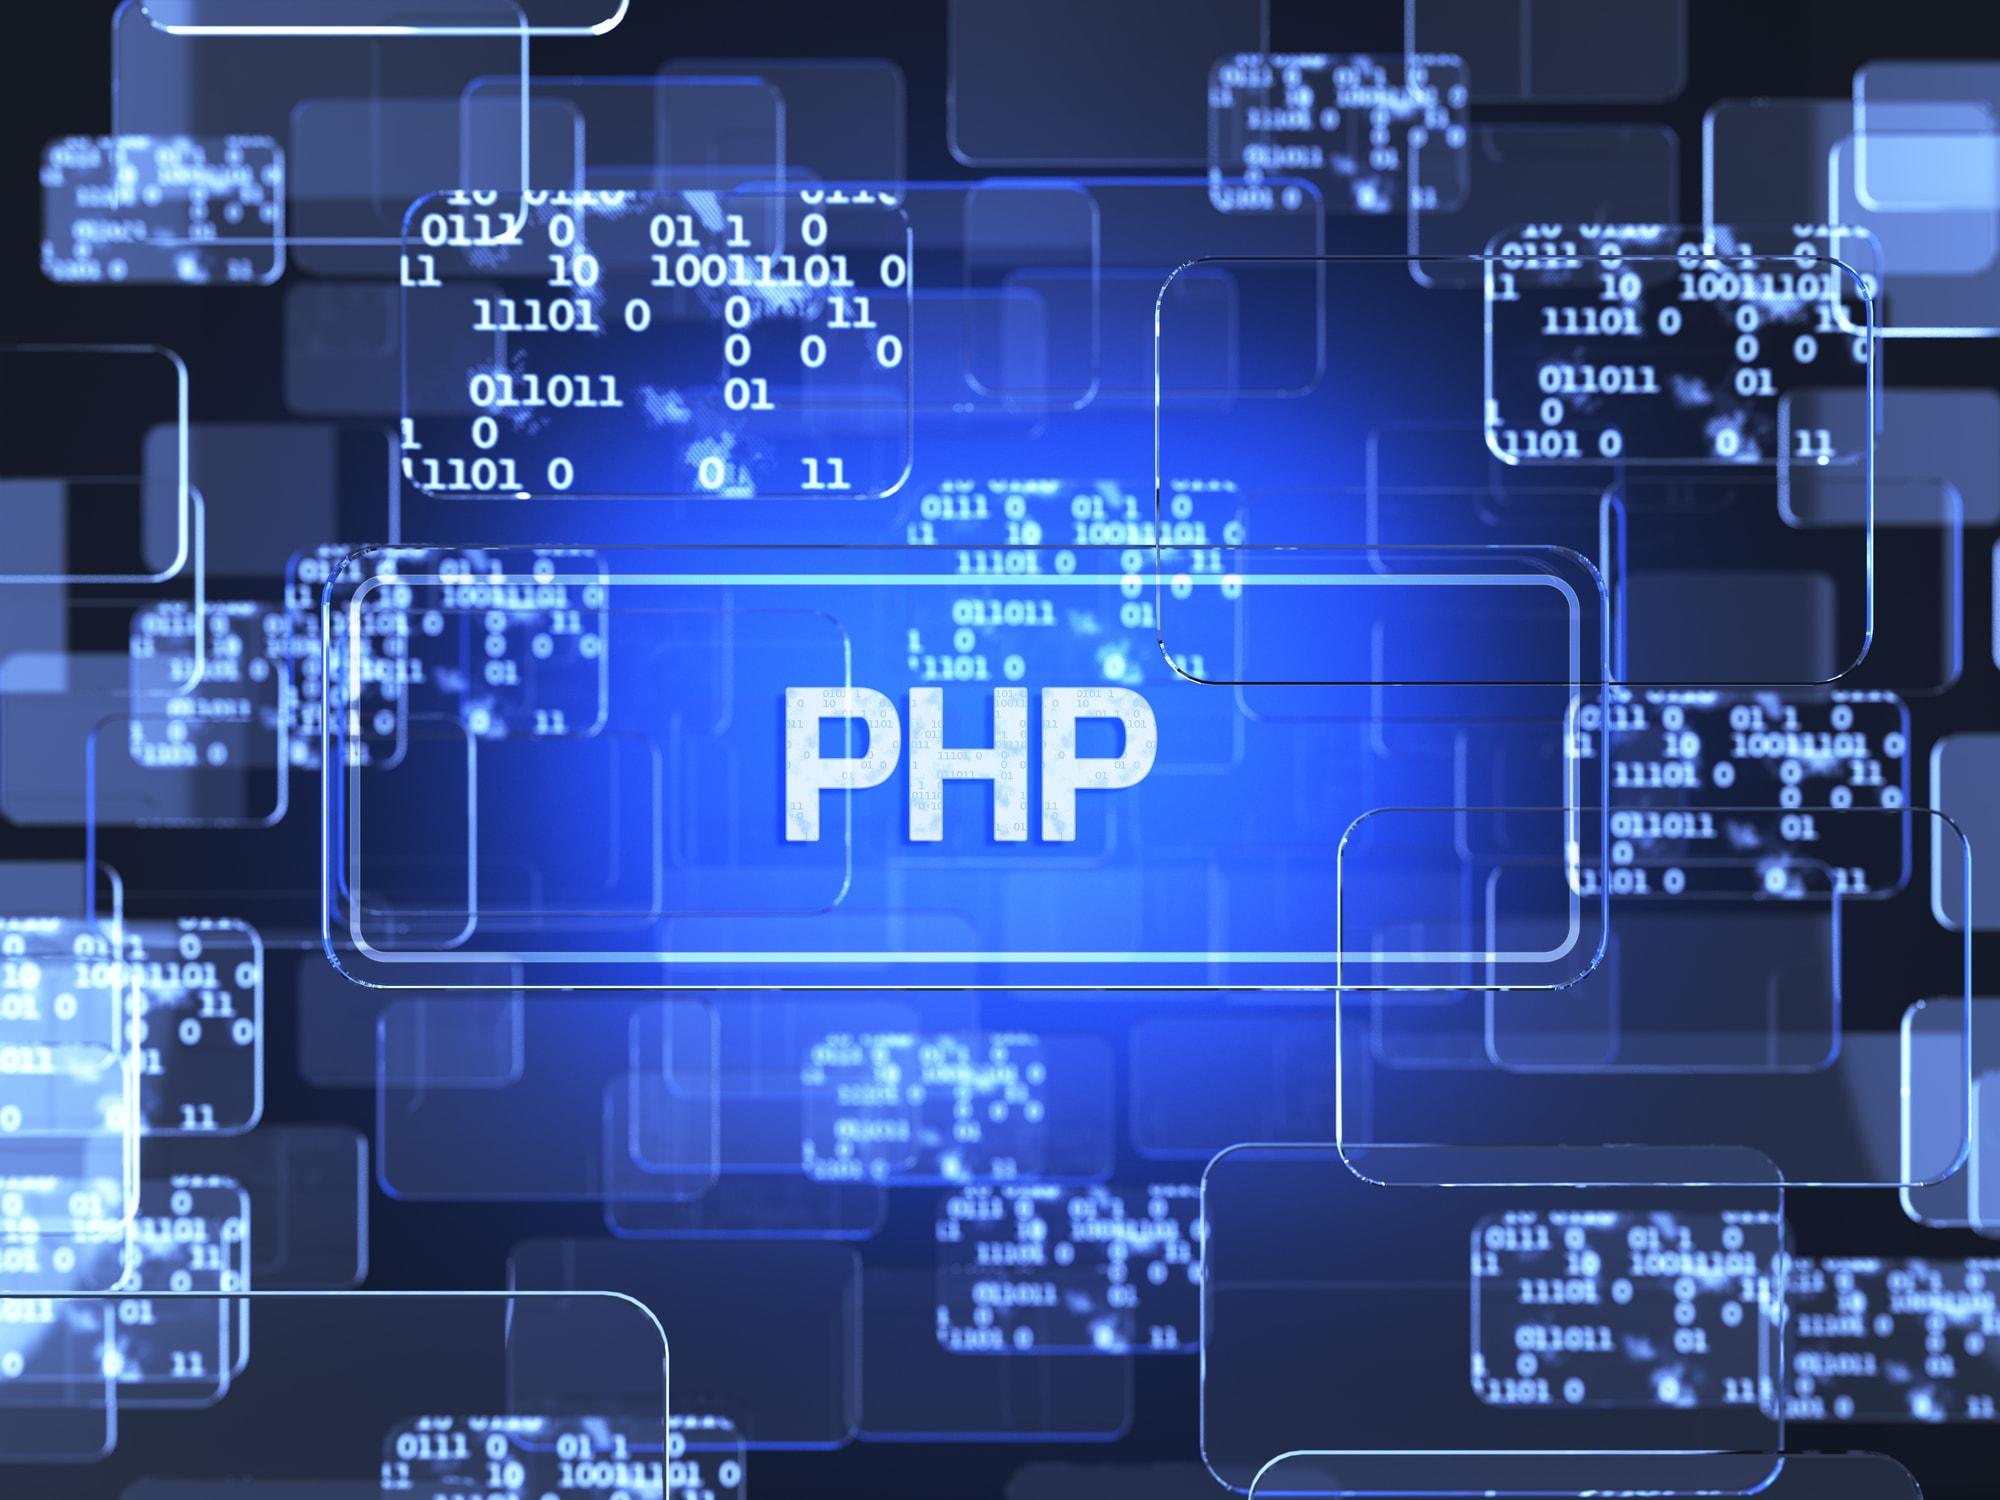 Cover Image for PHPとは？プログラミング初心者向けにPHPの基礎知識を解説！